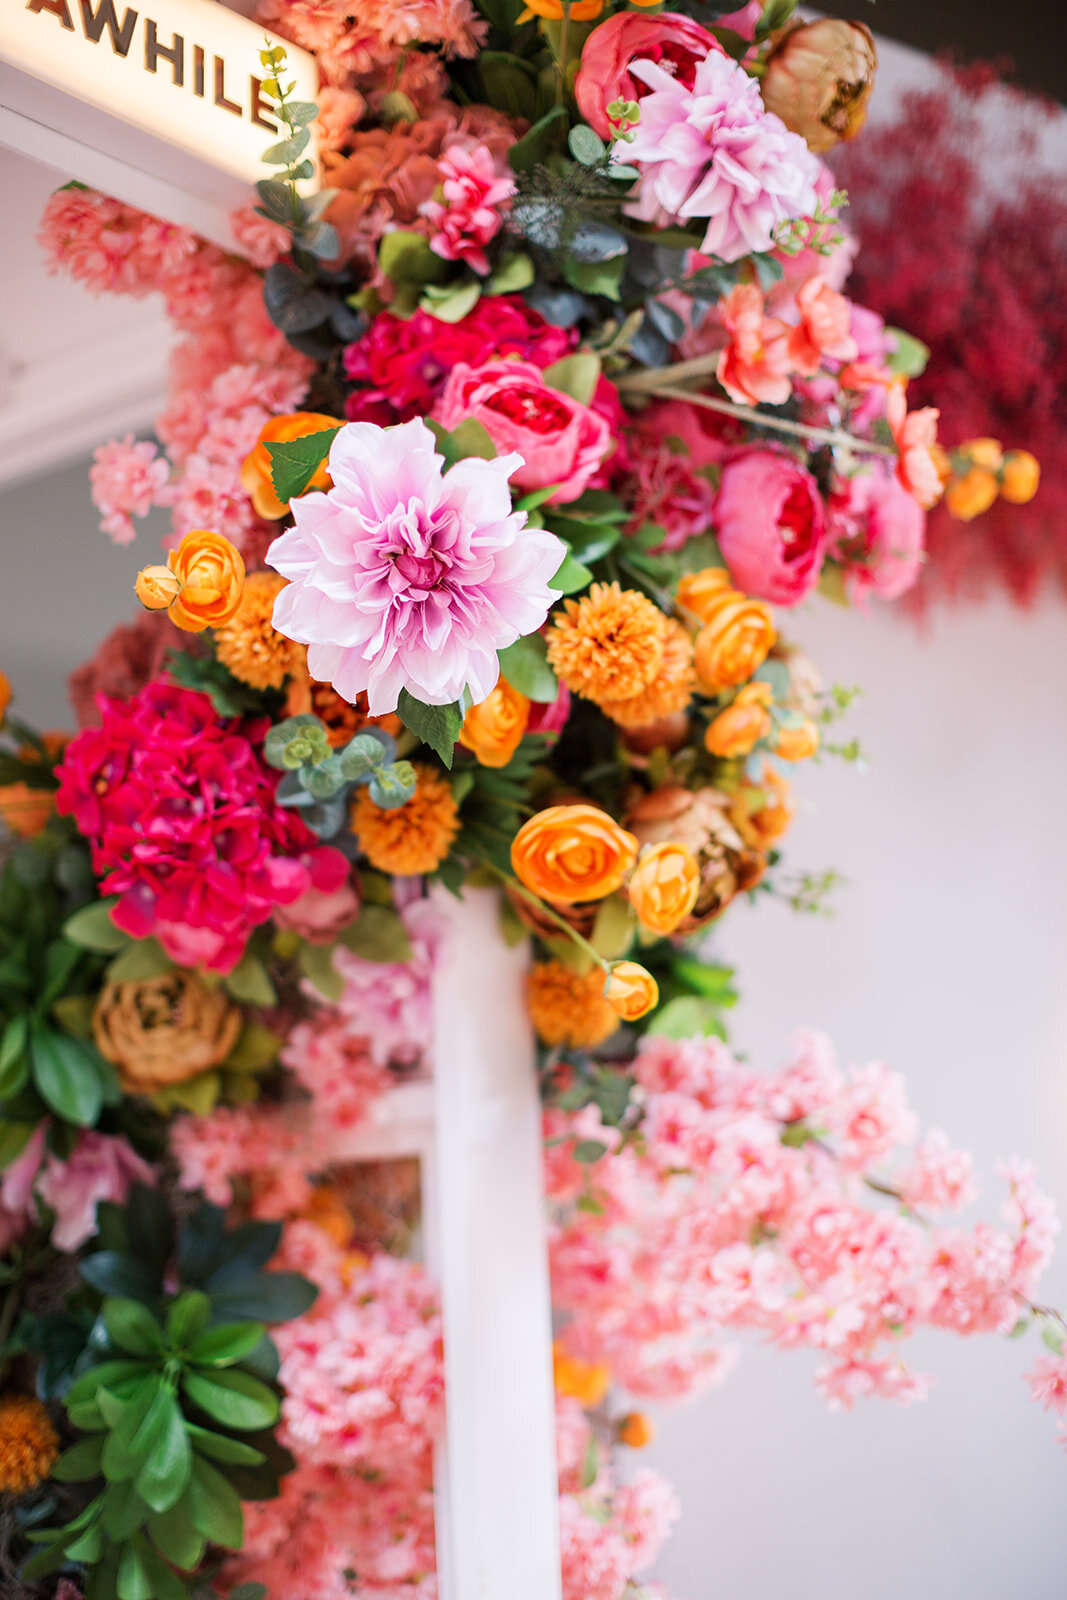 This whimsical, summery floral installation perfectly sets off this crisp white phone booth. Flowers used here are pink cherry blossom, blush dahlia, orange ranunculus, mauve hydrangea, and lush colorful blooms. Designed for 5th and Broadway in Nash…